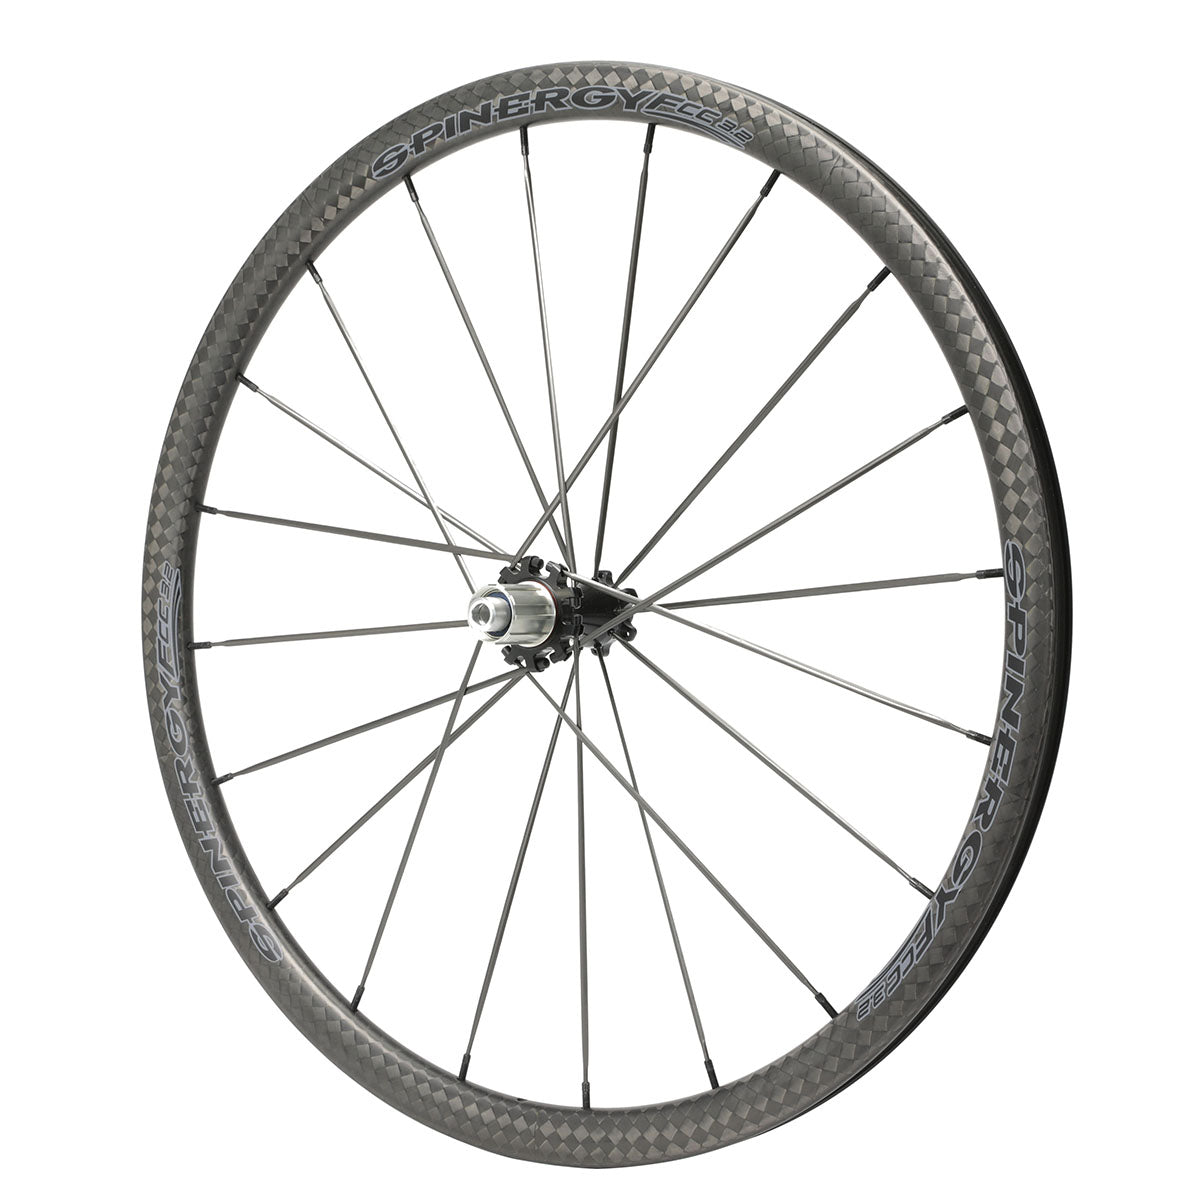 SPINERGY Stealth FCC 3.2 700c Rear Wheel for Road Bikes - Action Emporium